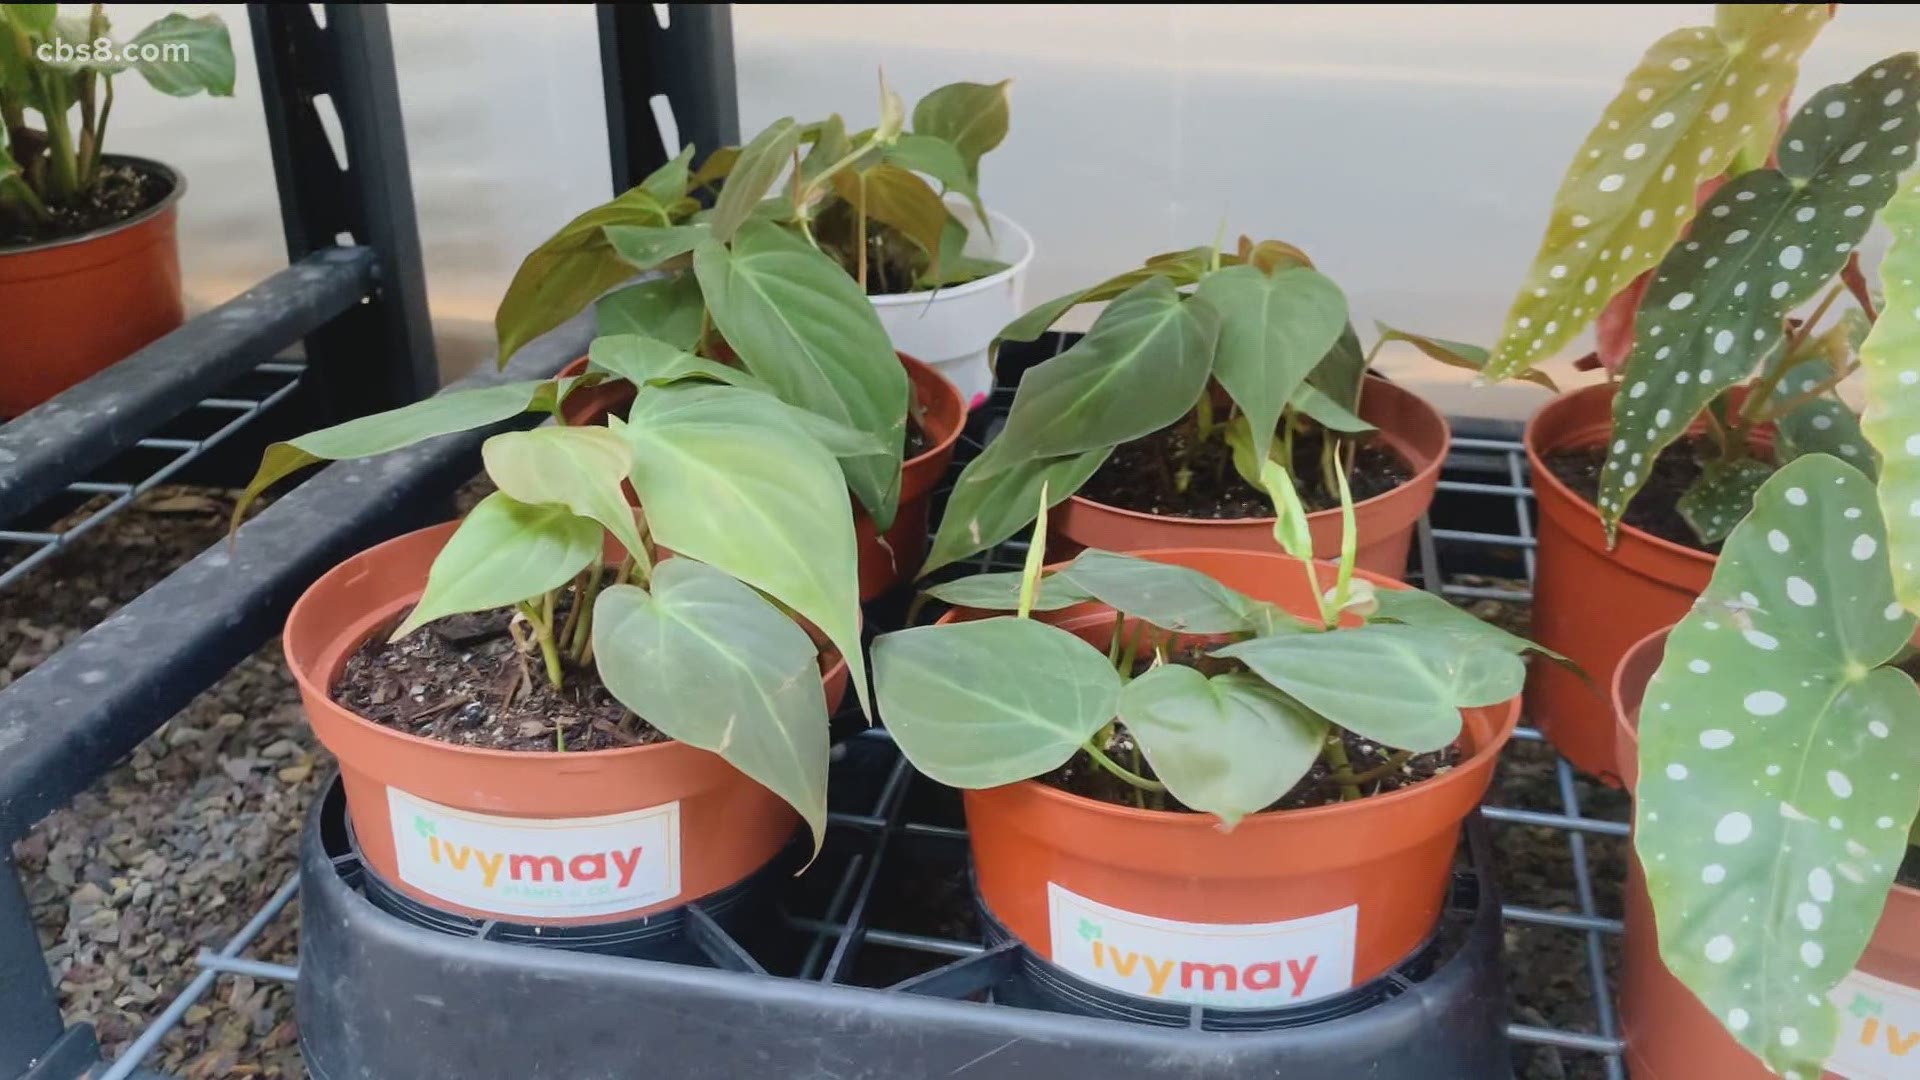 Ivy May and Company delivers house plants all around San Diego to people who are staying home as a way to boost mental health.